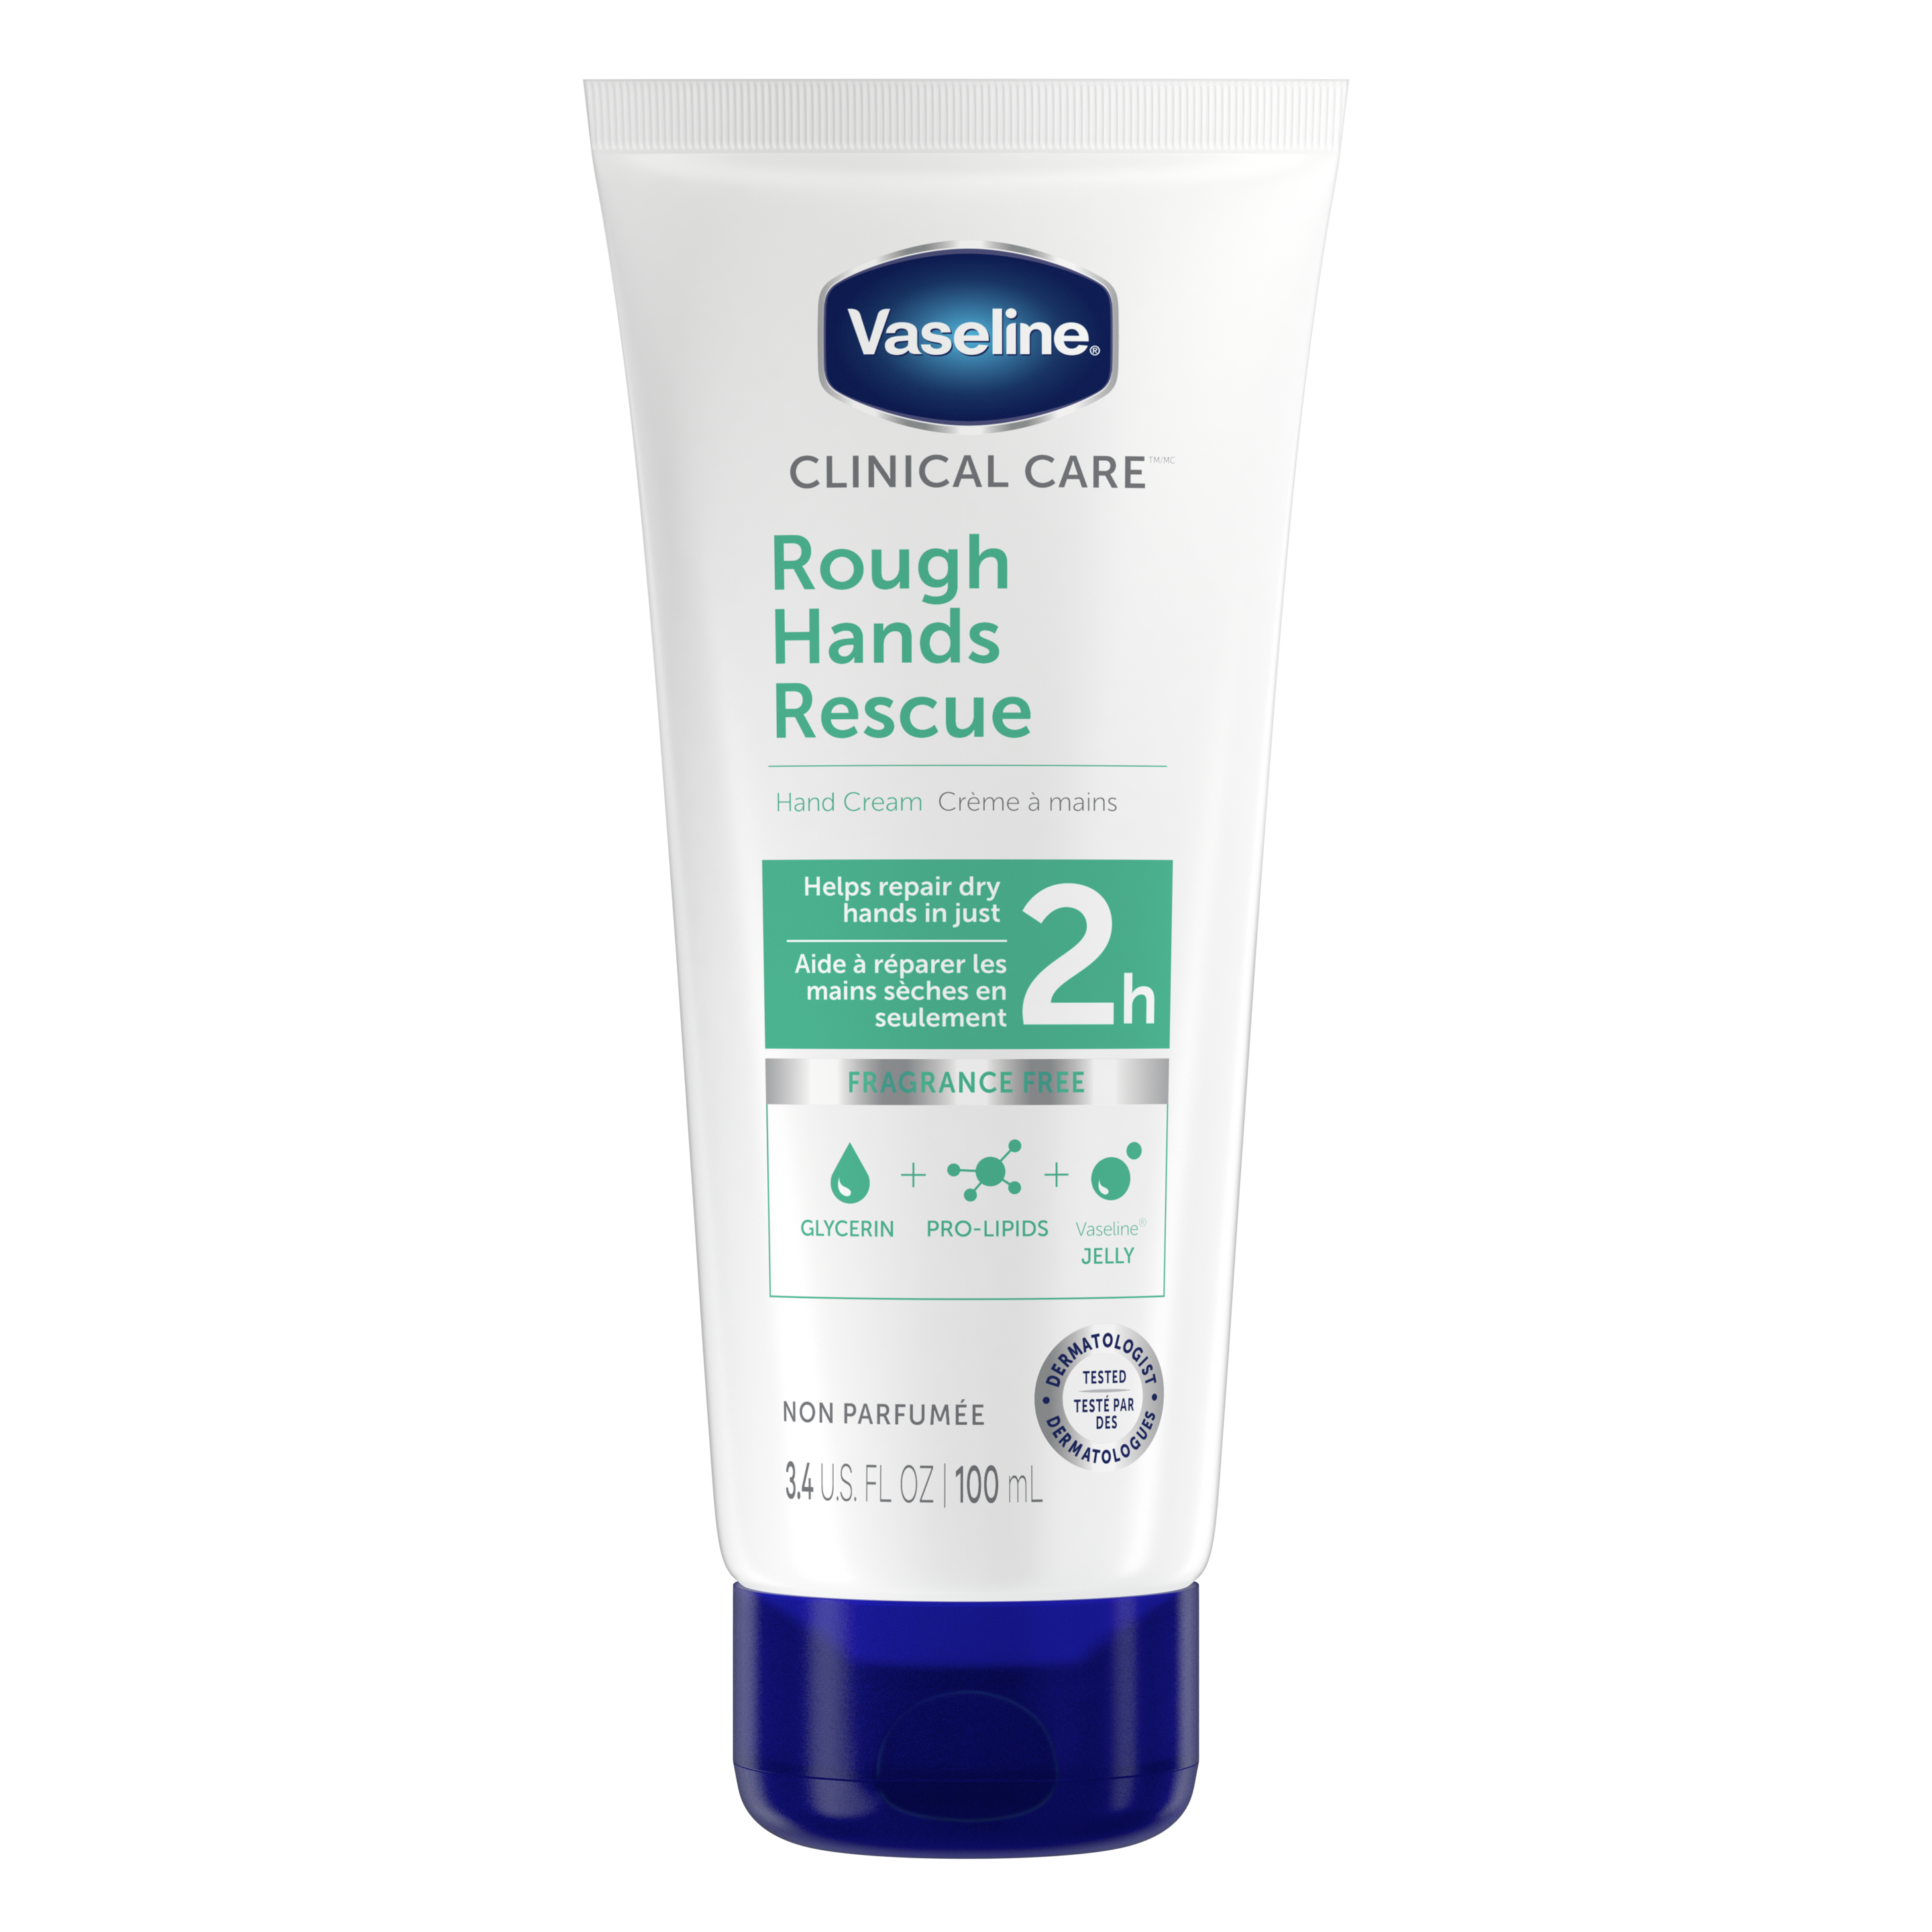 Best Quality Foot Care Creams Online Shopping in India